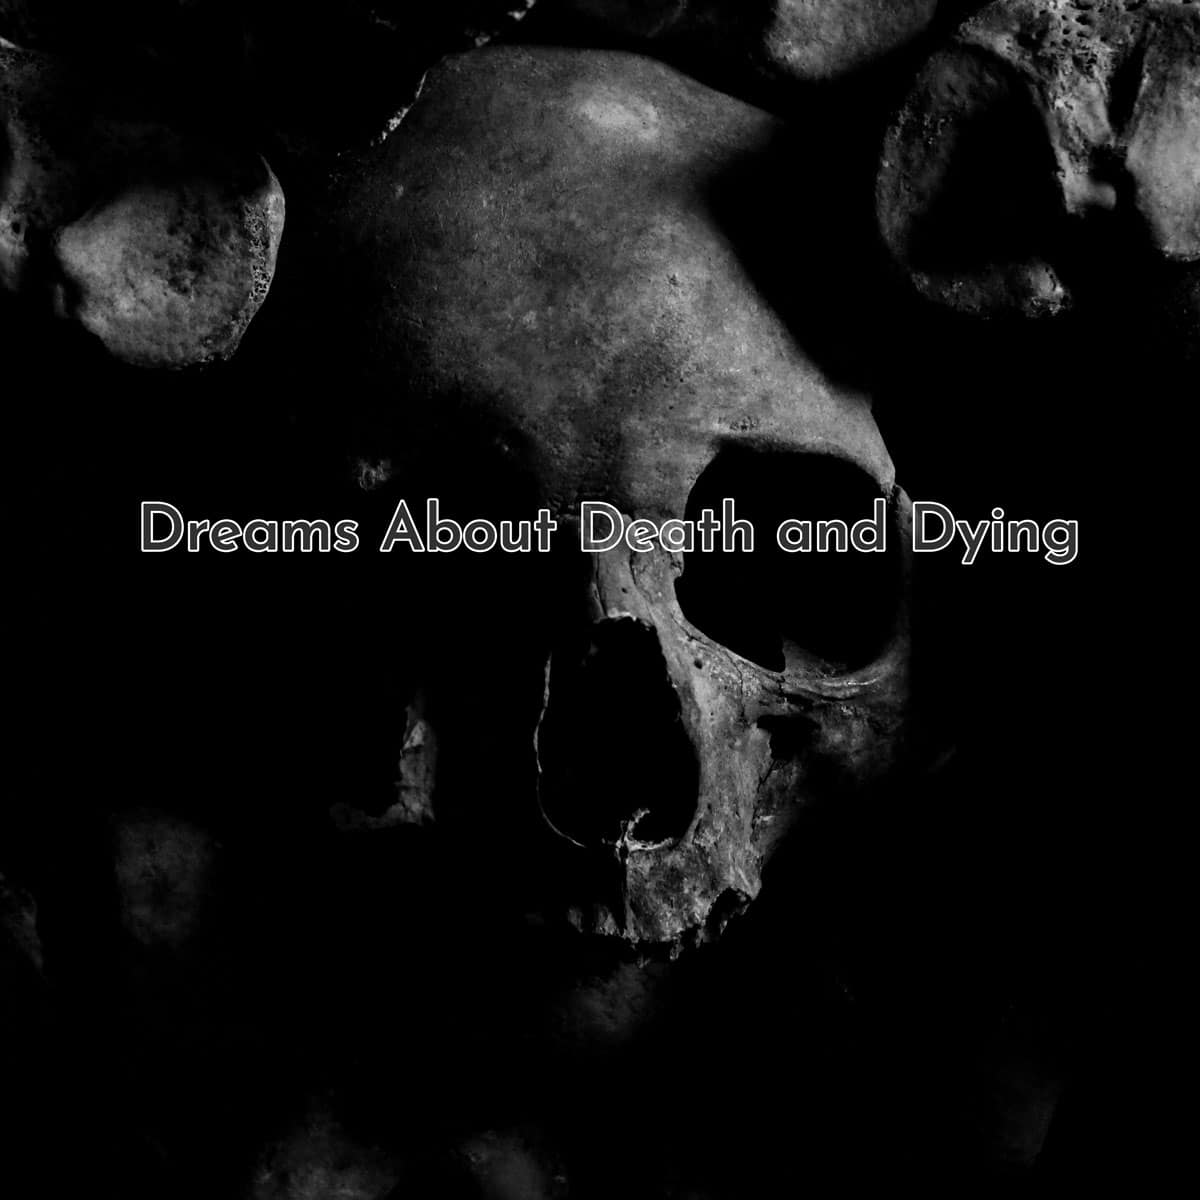 Dreams About Death and Dying. What do they mean?